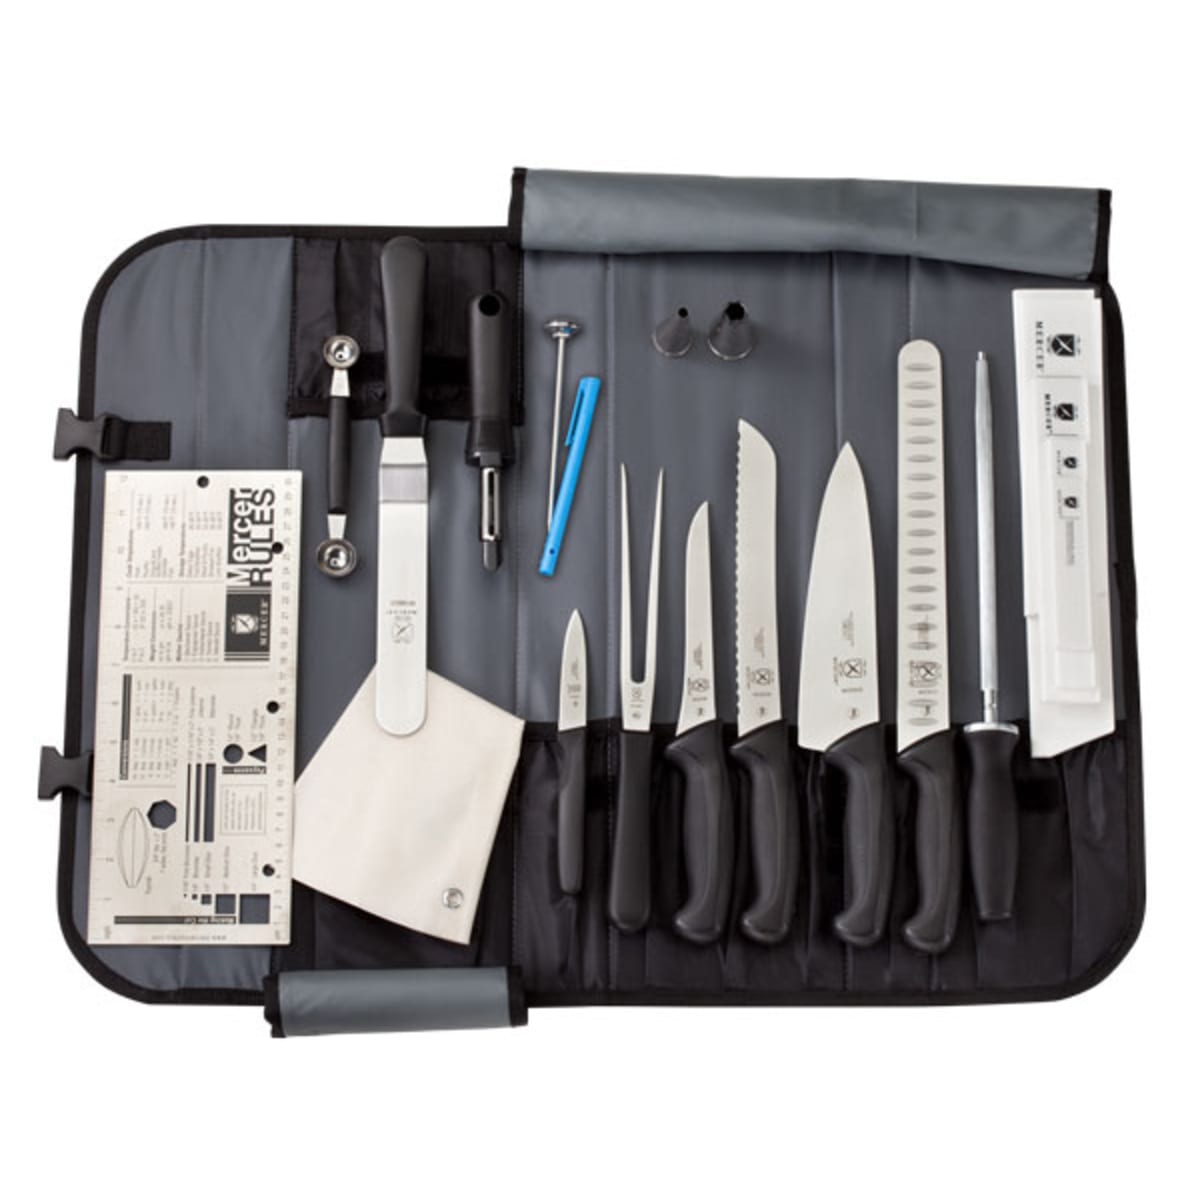  Mercer Culinary Partners in Education 23-Piece Millennia  Culinary School Kit,Black: Kitchen Tool Sets: Home & Kitchen